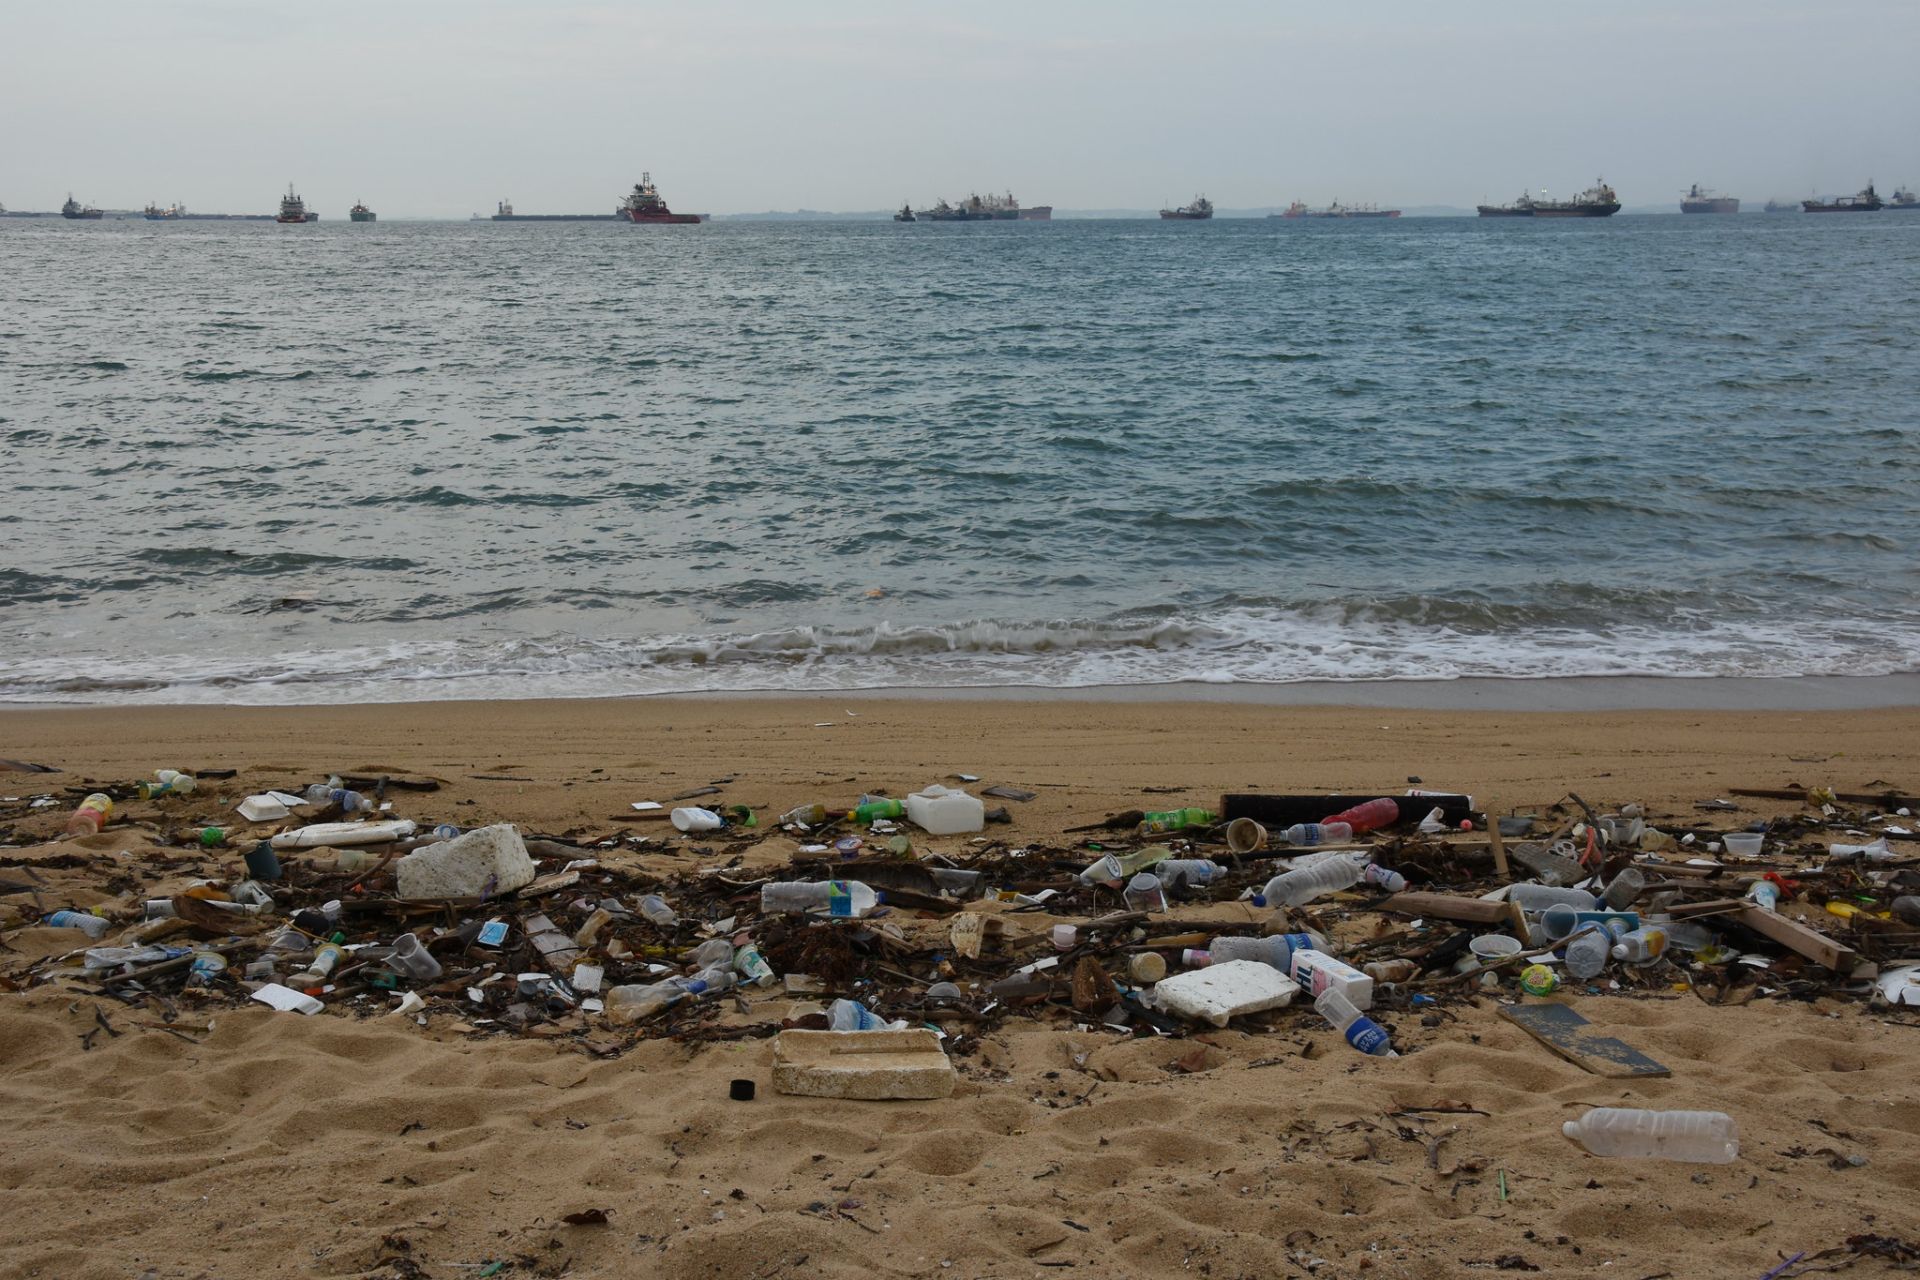 ASEAN members launch action plan to curb marine plastic pollution